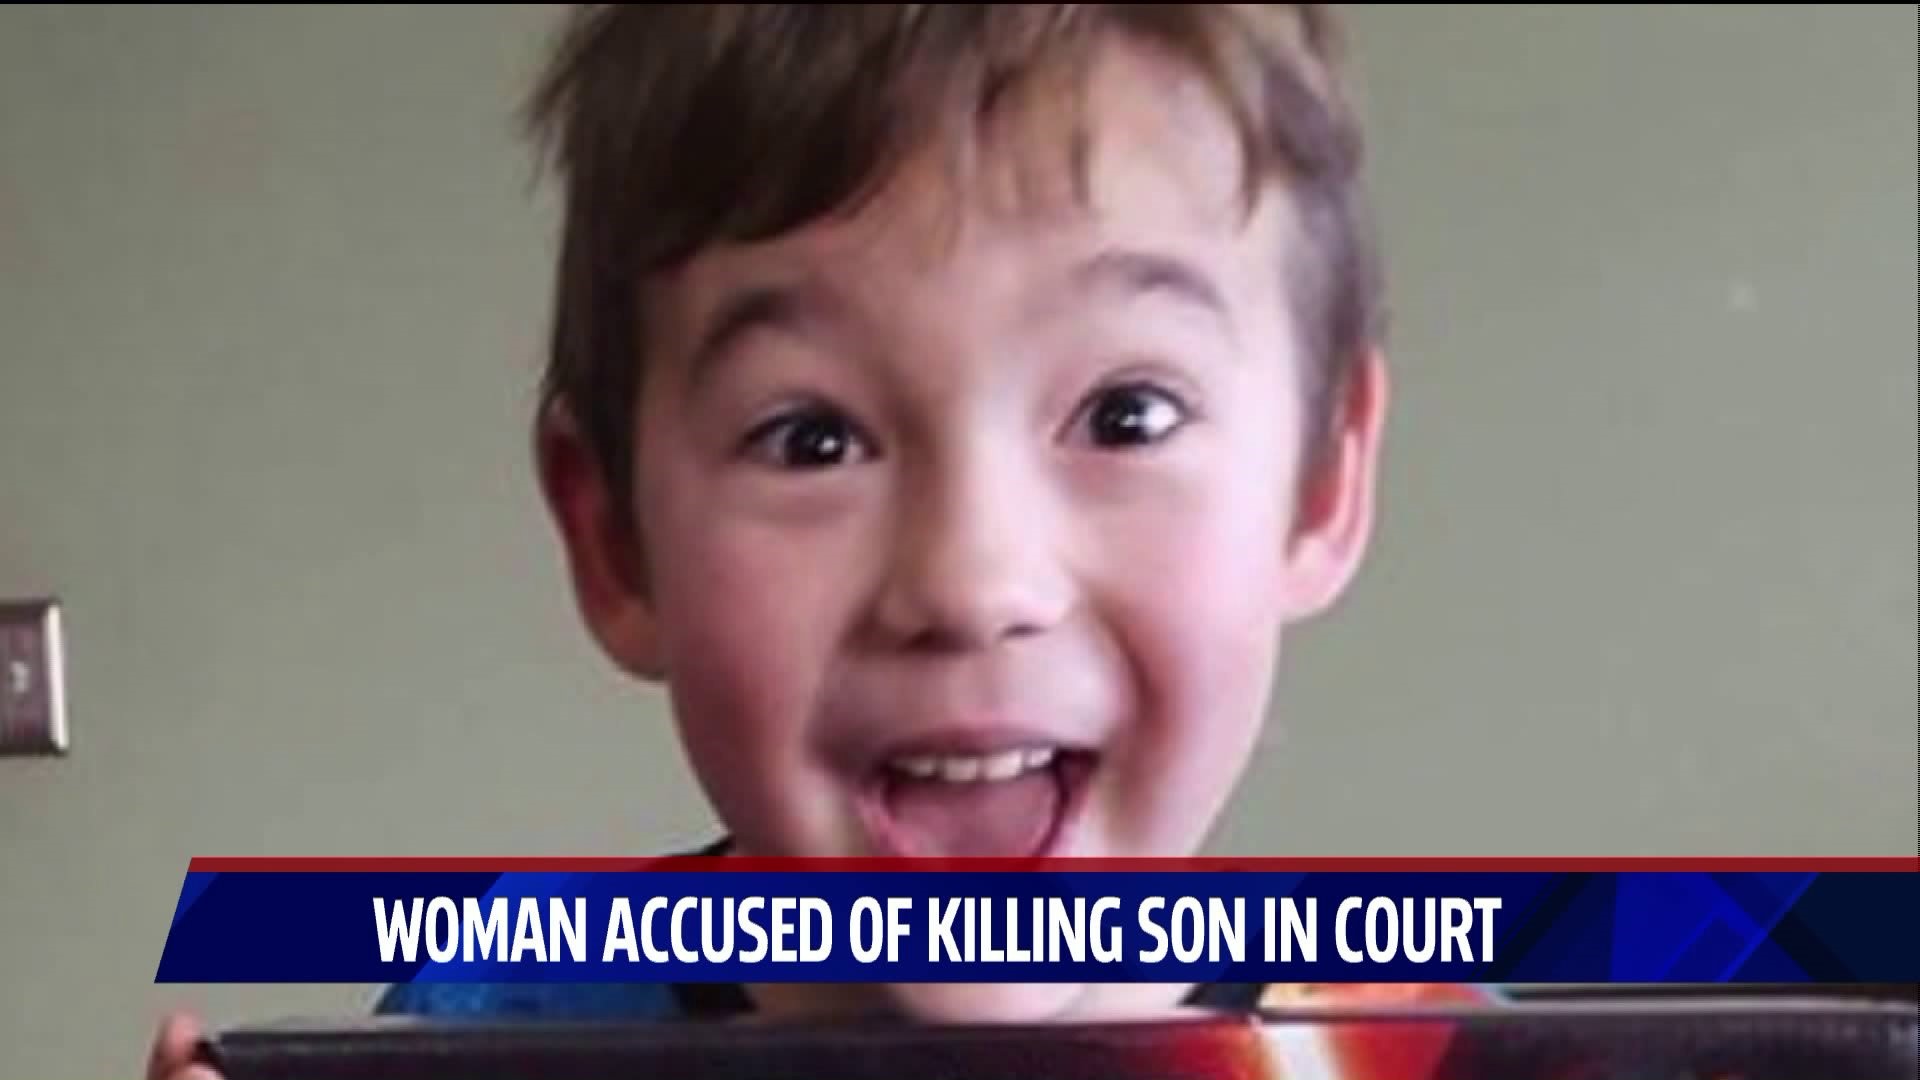 Woman accused of killing son in court